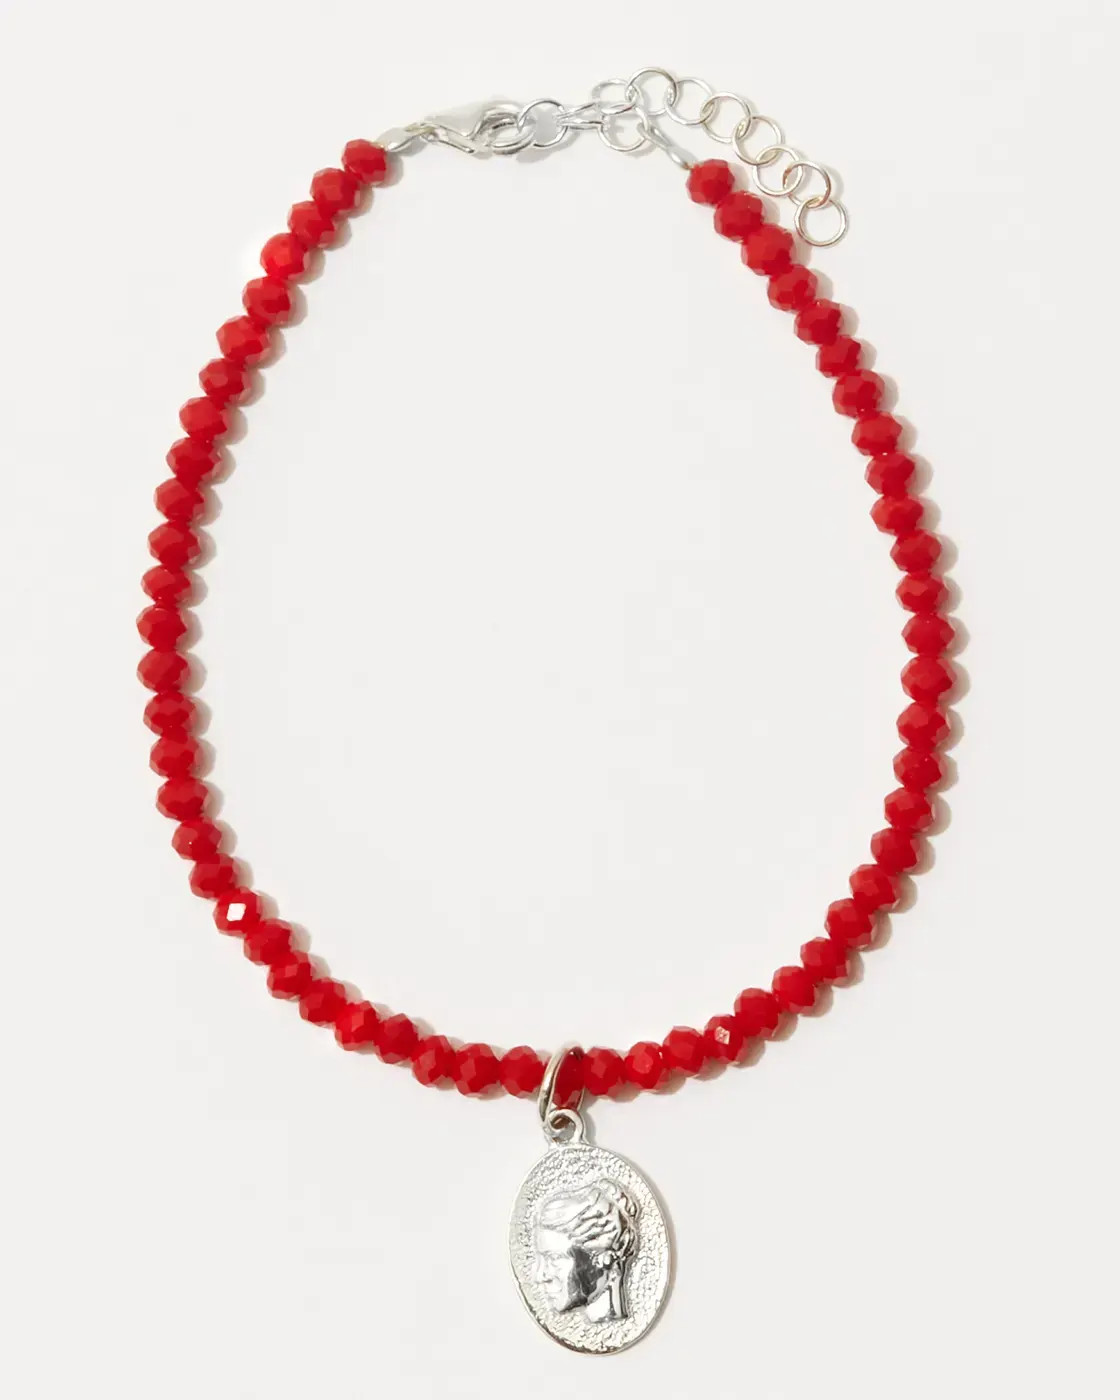 Ygieia Granada Red Glass Crystals Bracelet with Silver Pendant